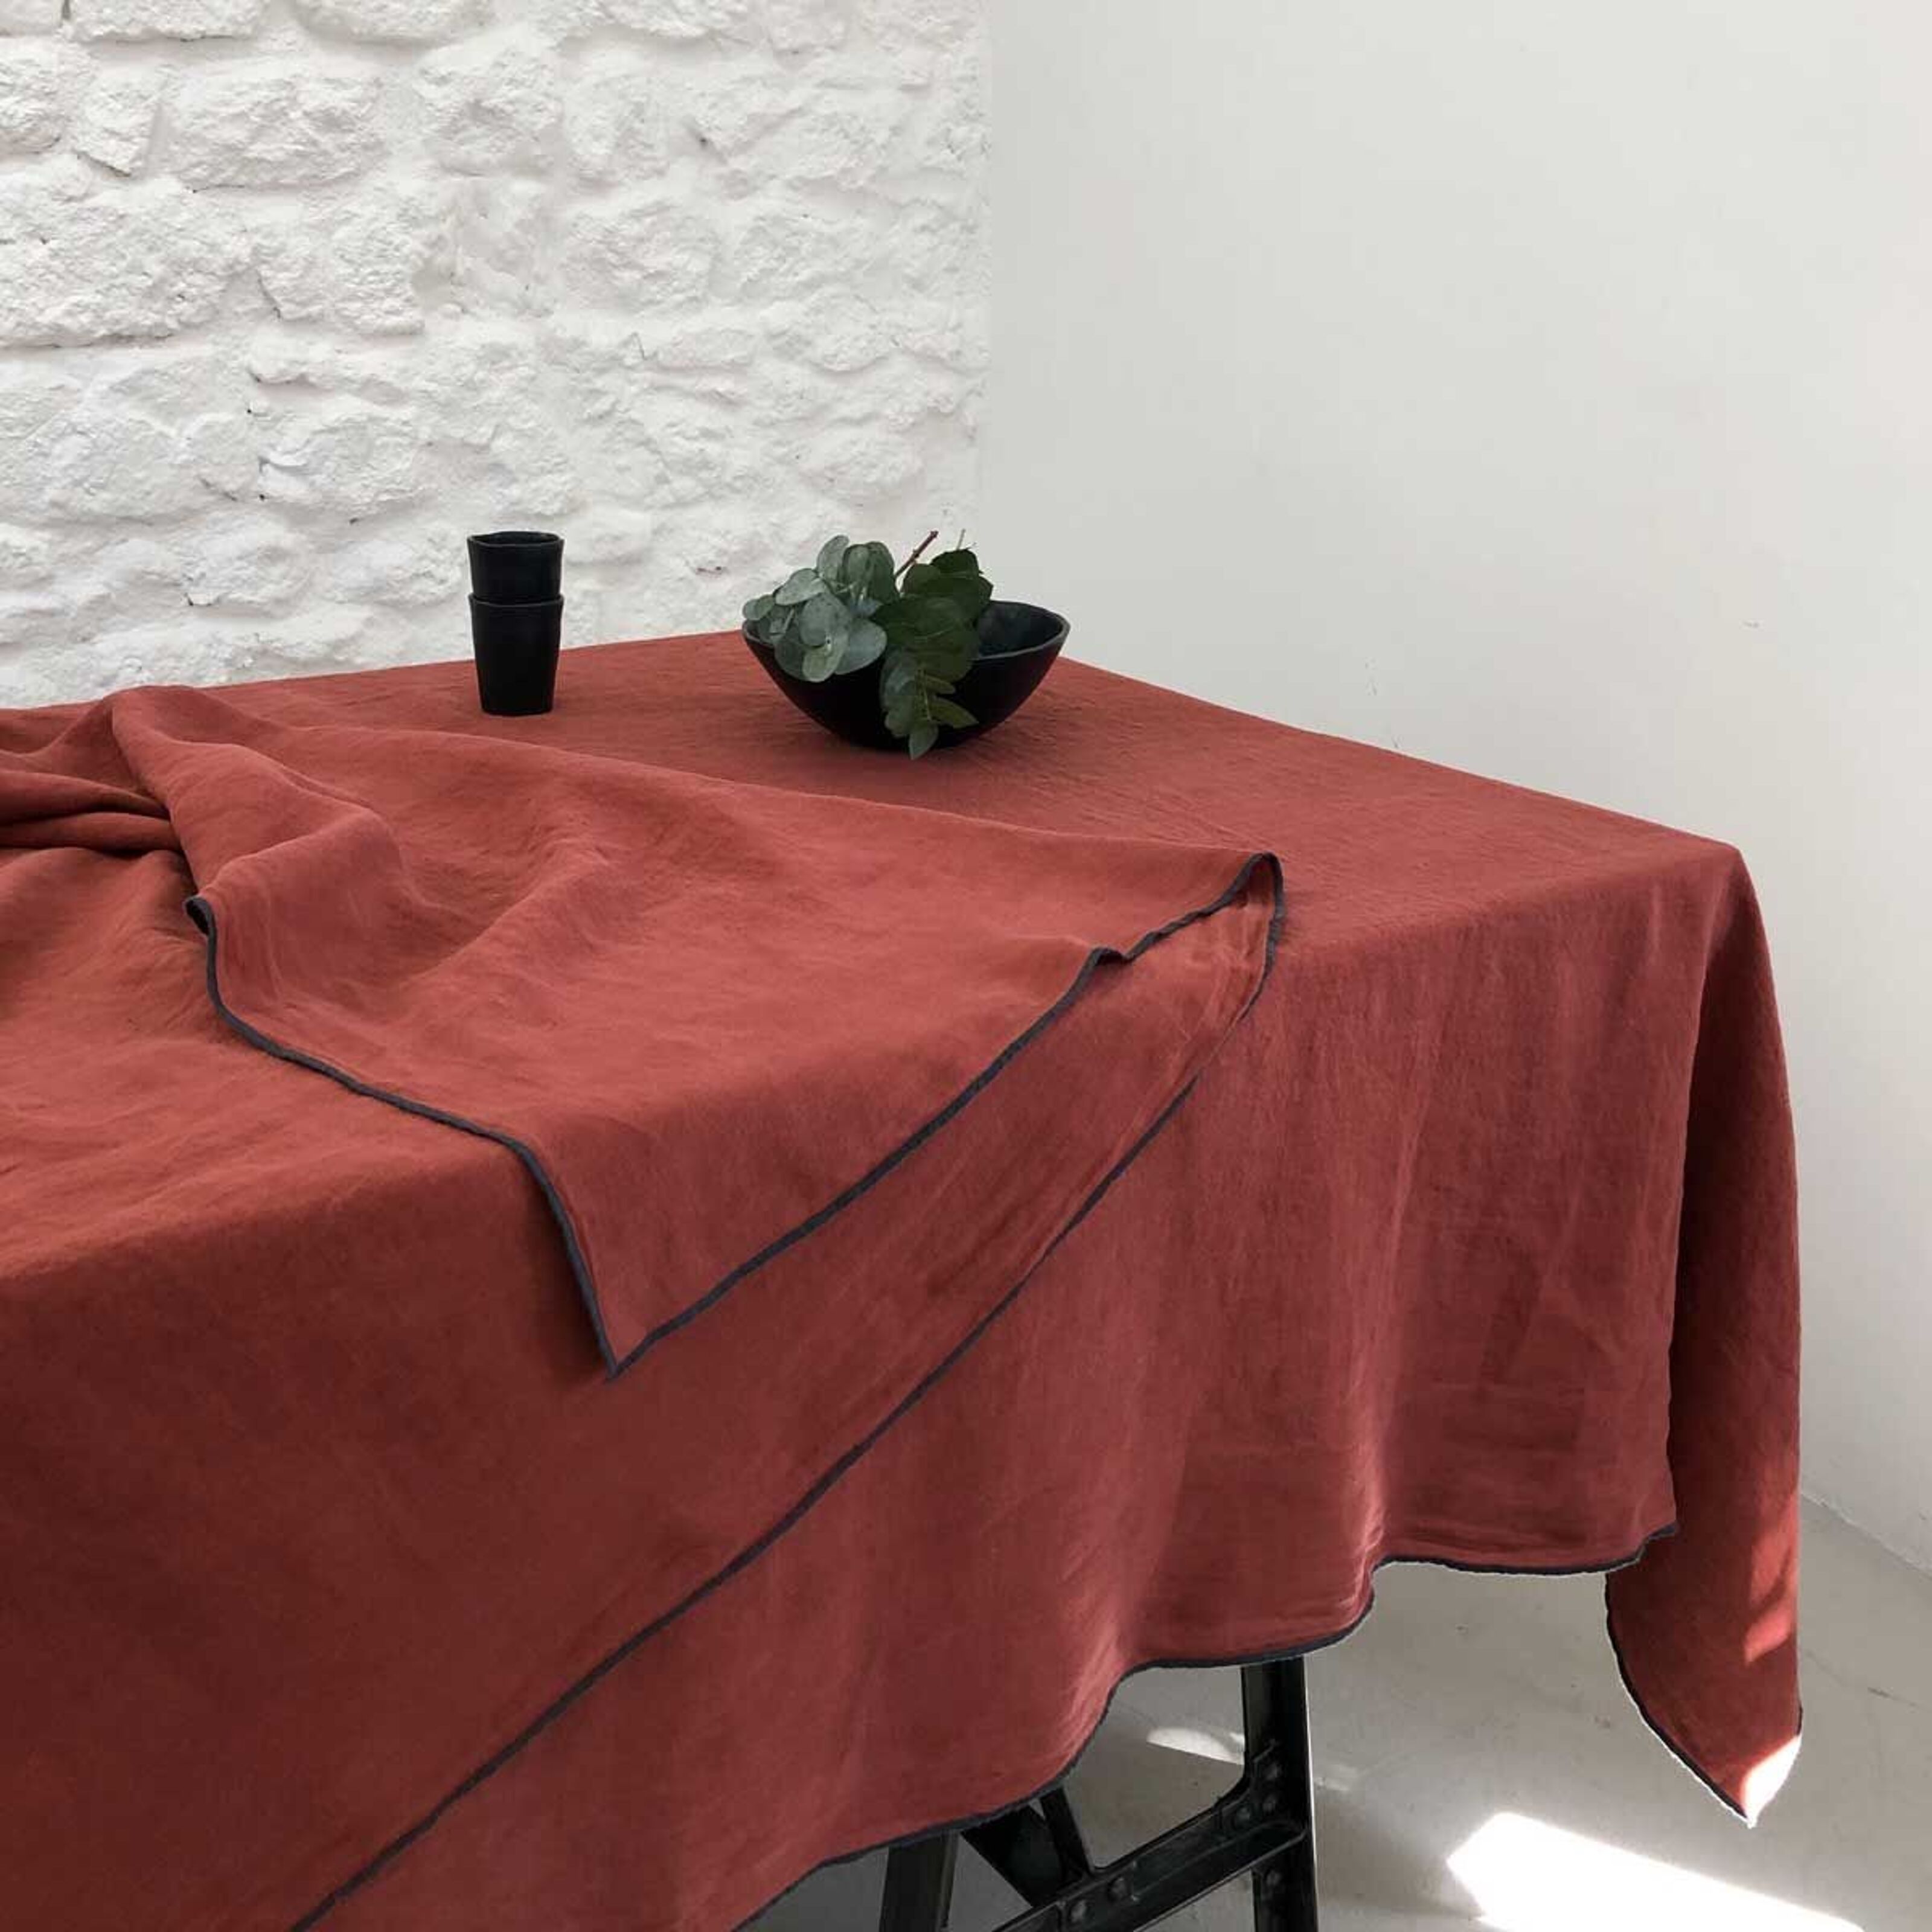 Buy wholesale washed overlock Oslo or - Vernet Passage tablecloth 170x300cm terracotta linen curtain